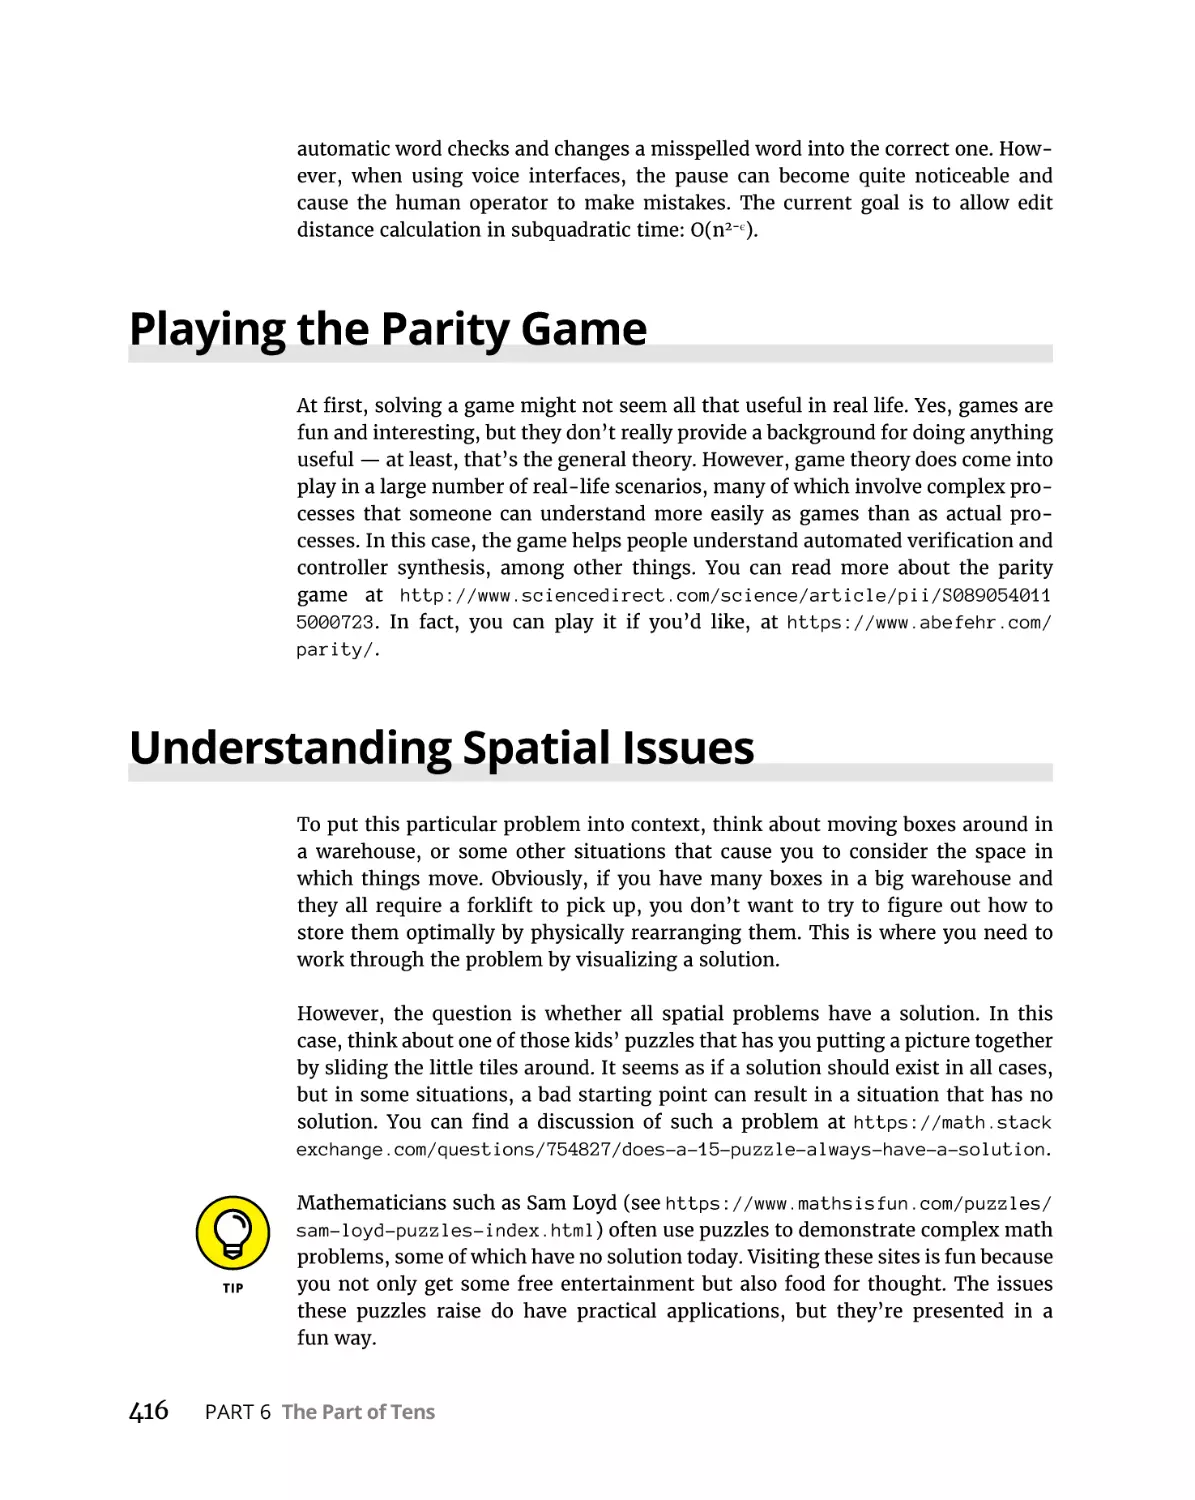 Playing the Parity Game
Understanding Spatial Issues